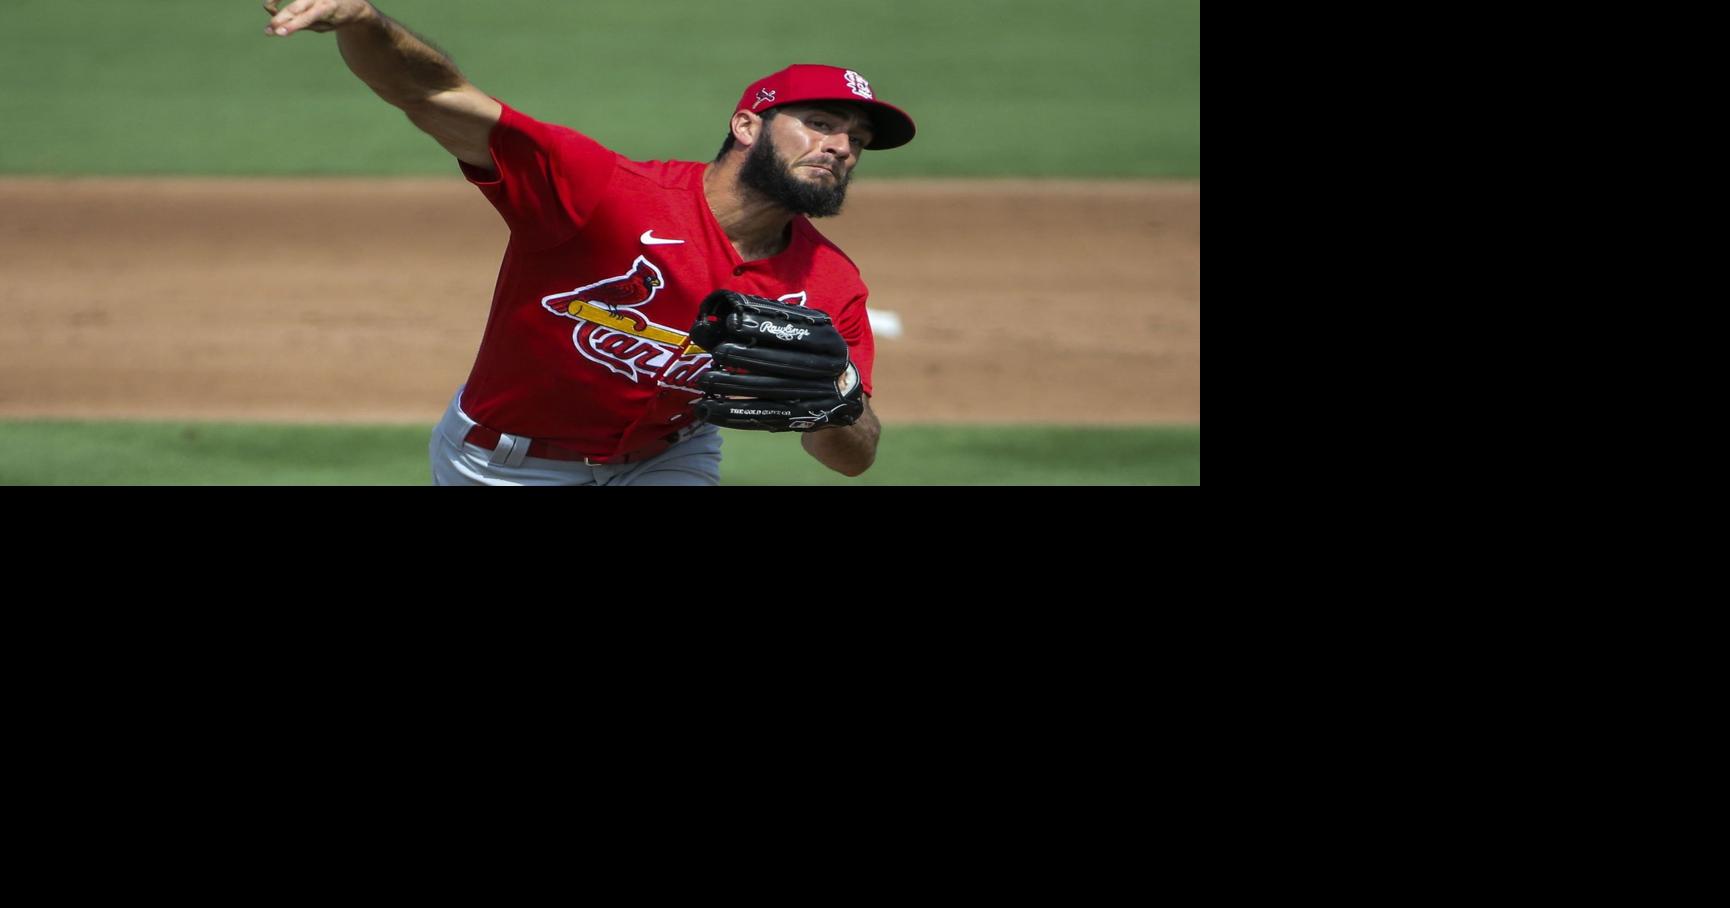 Kwang Hyun Kim works two perfect innings in debut as St. Louis Cardinals  starter 